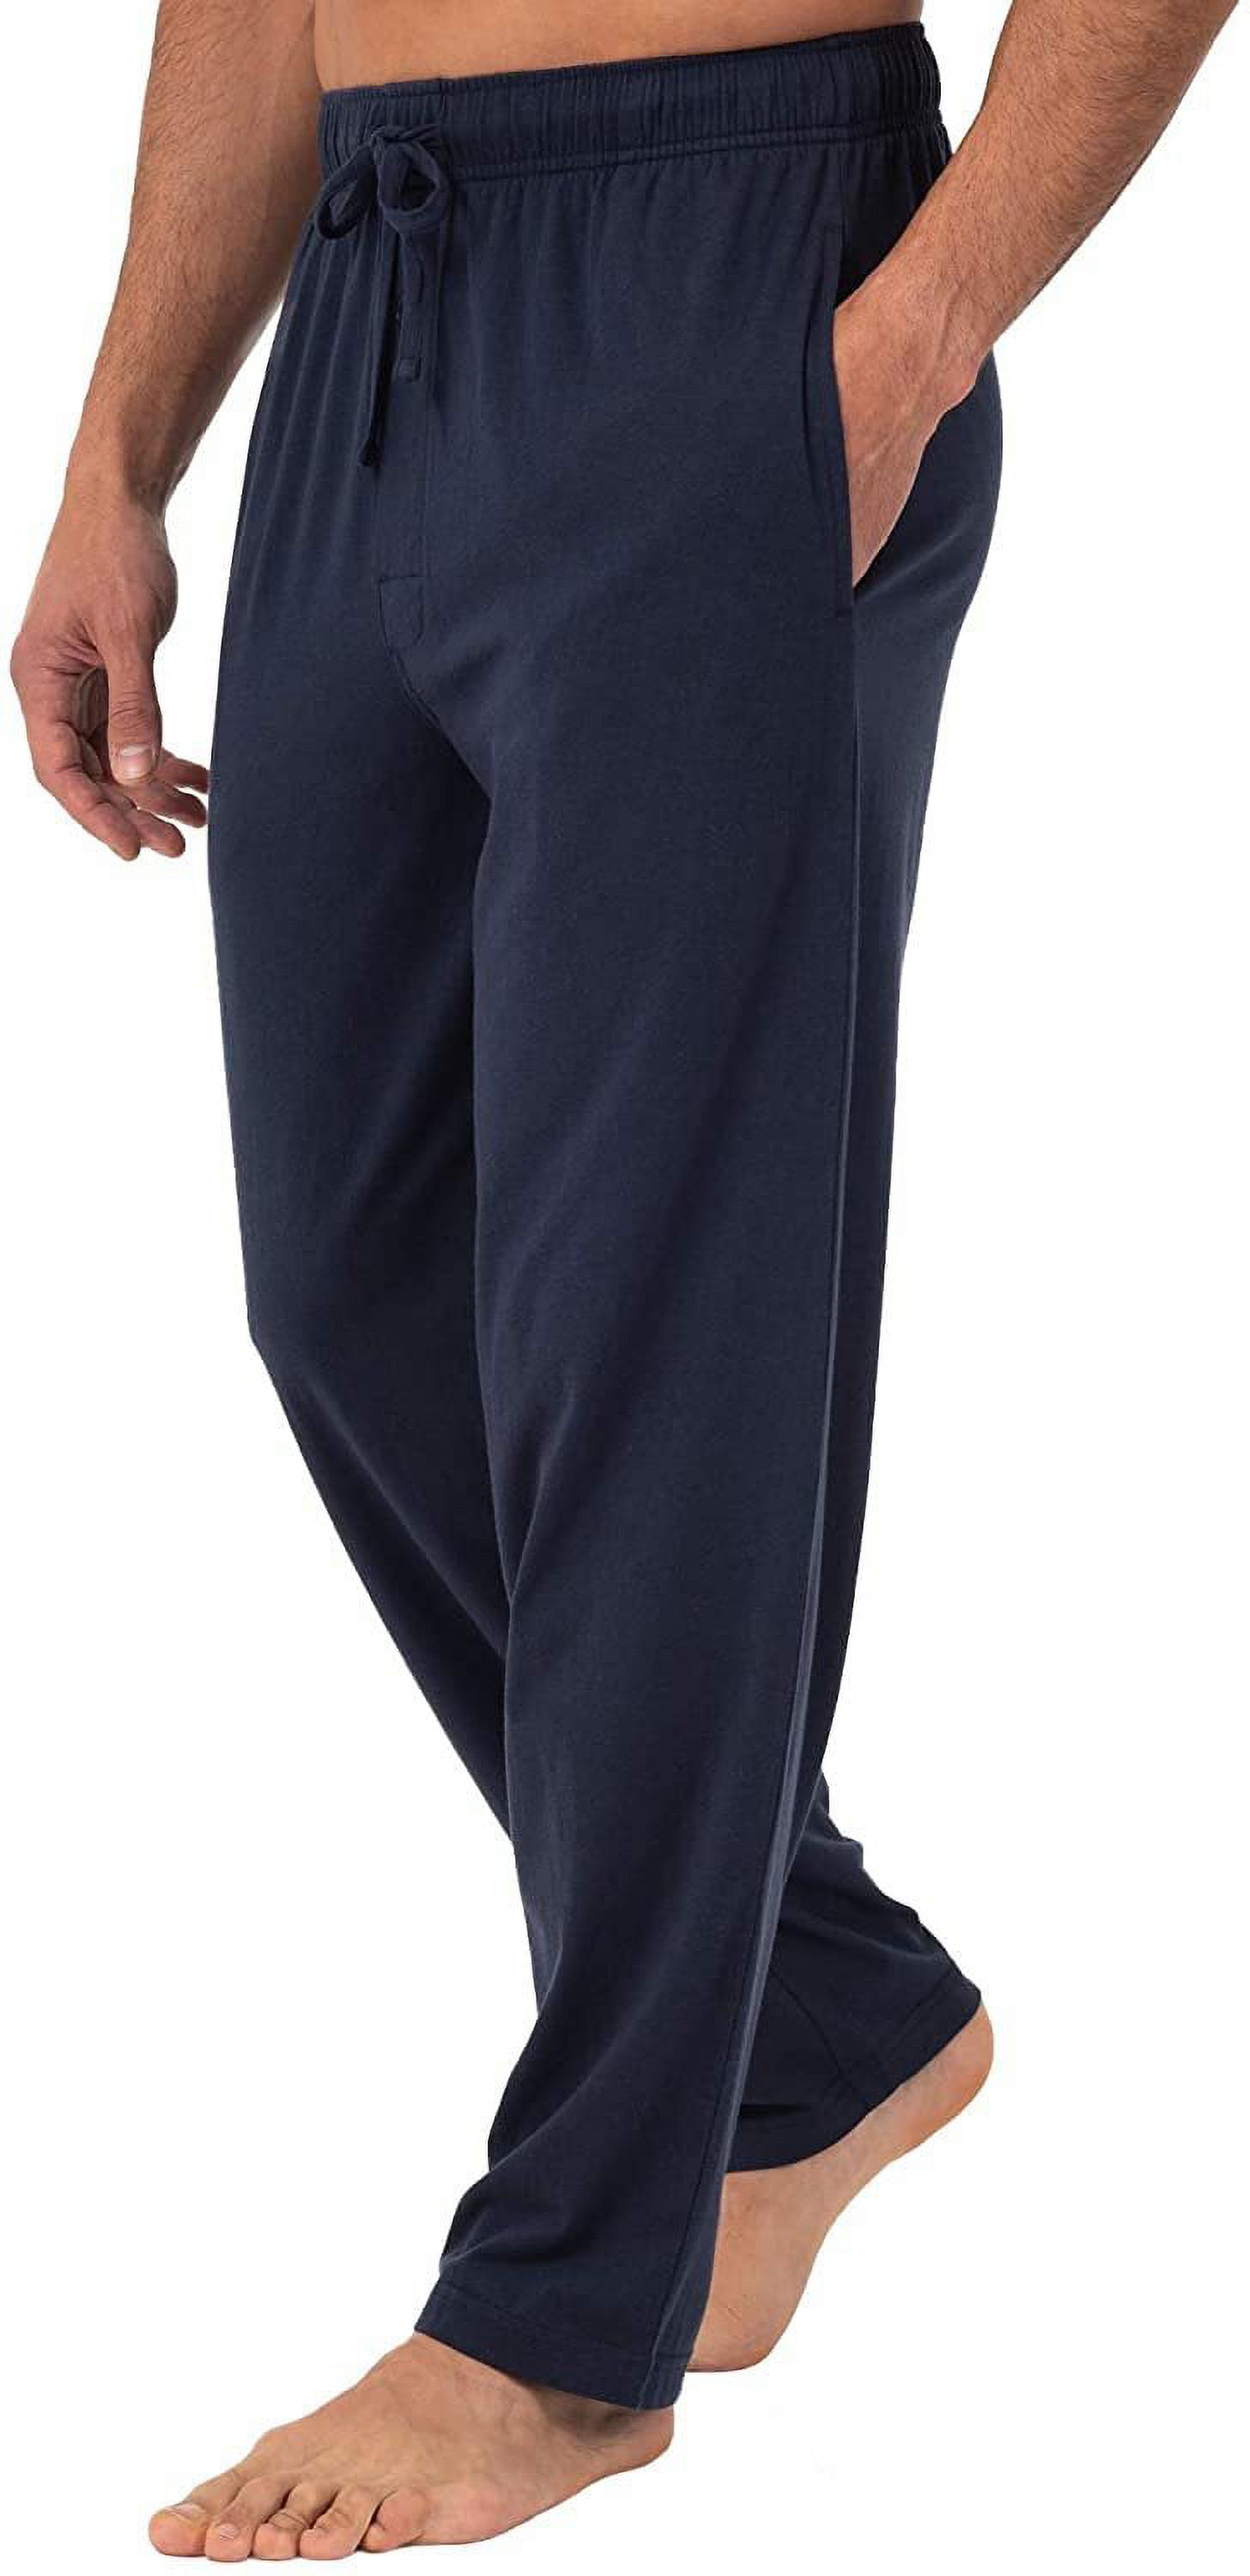 Fruit of the Loom Men's and Big Men's Jersey Knit Pajama Pants, Sizes S-6XL - image 5 of 7